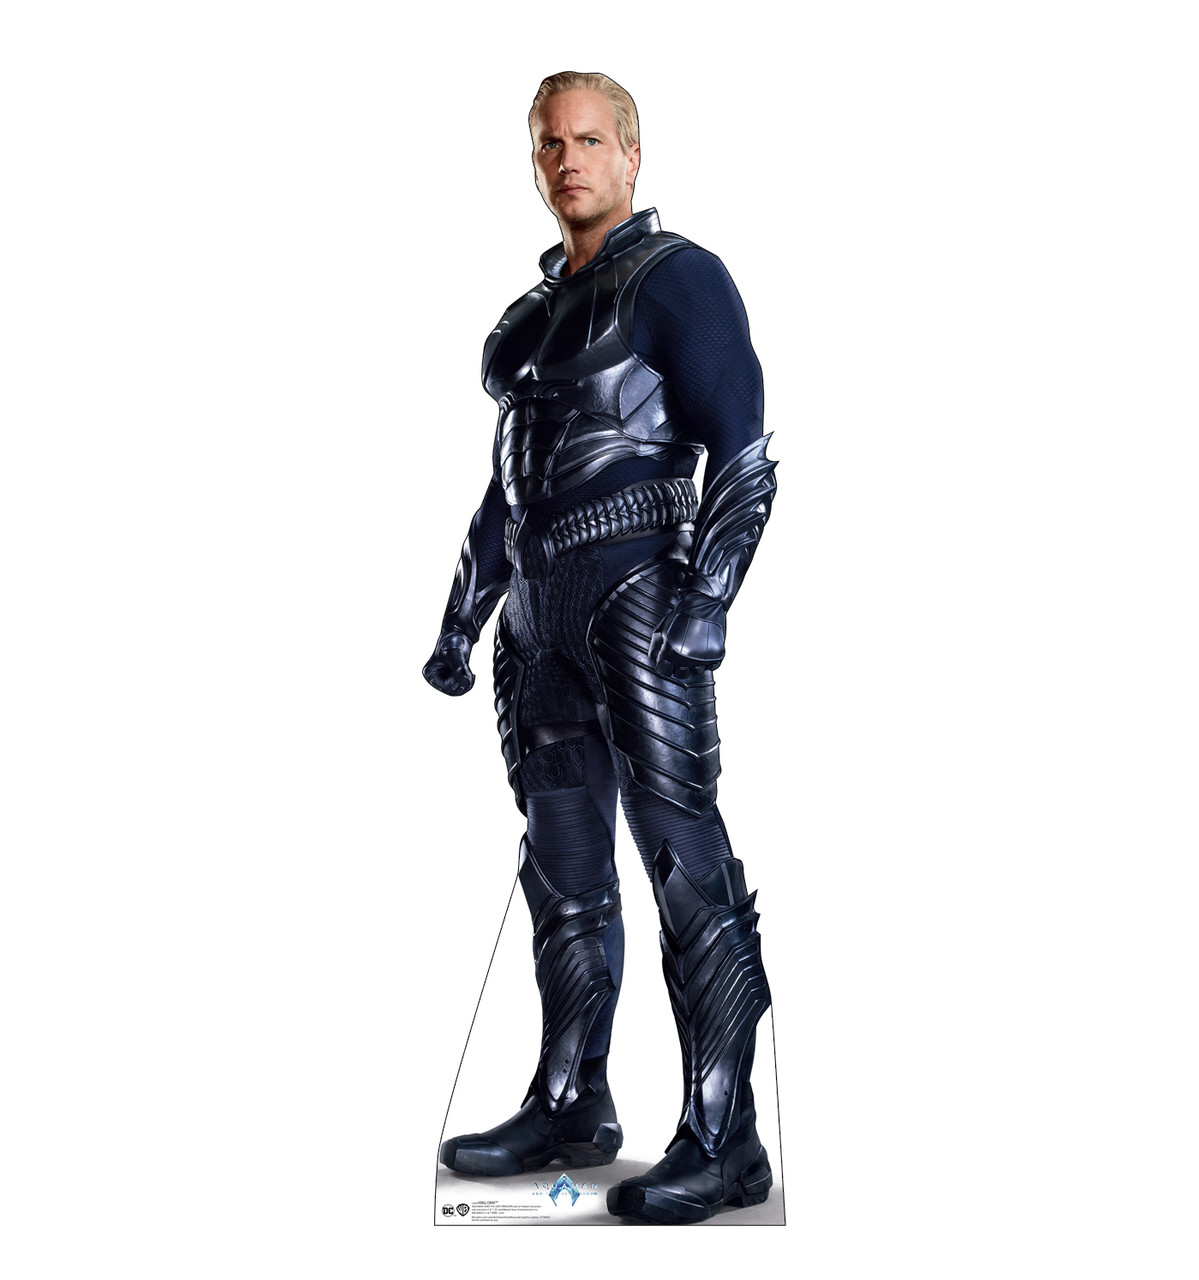 Life-size cardboard standee of King Orm.